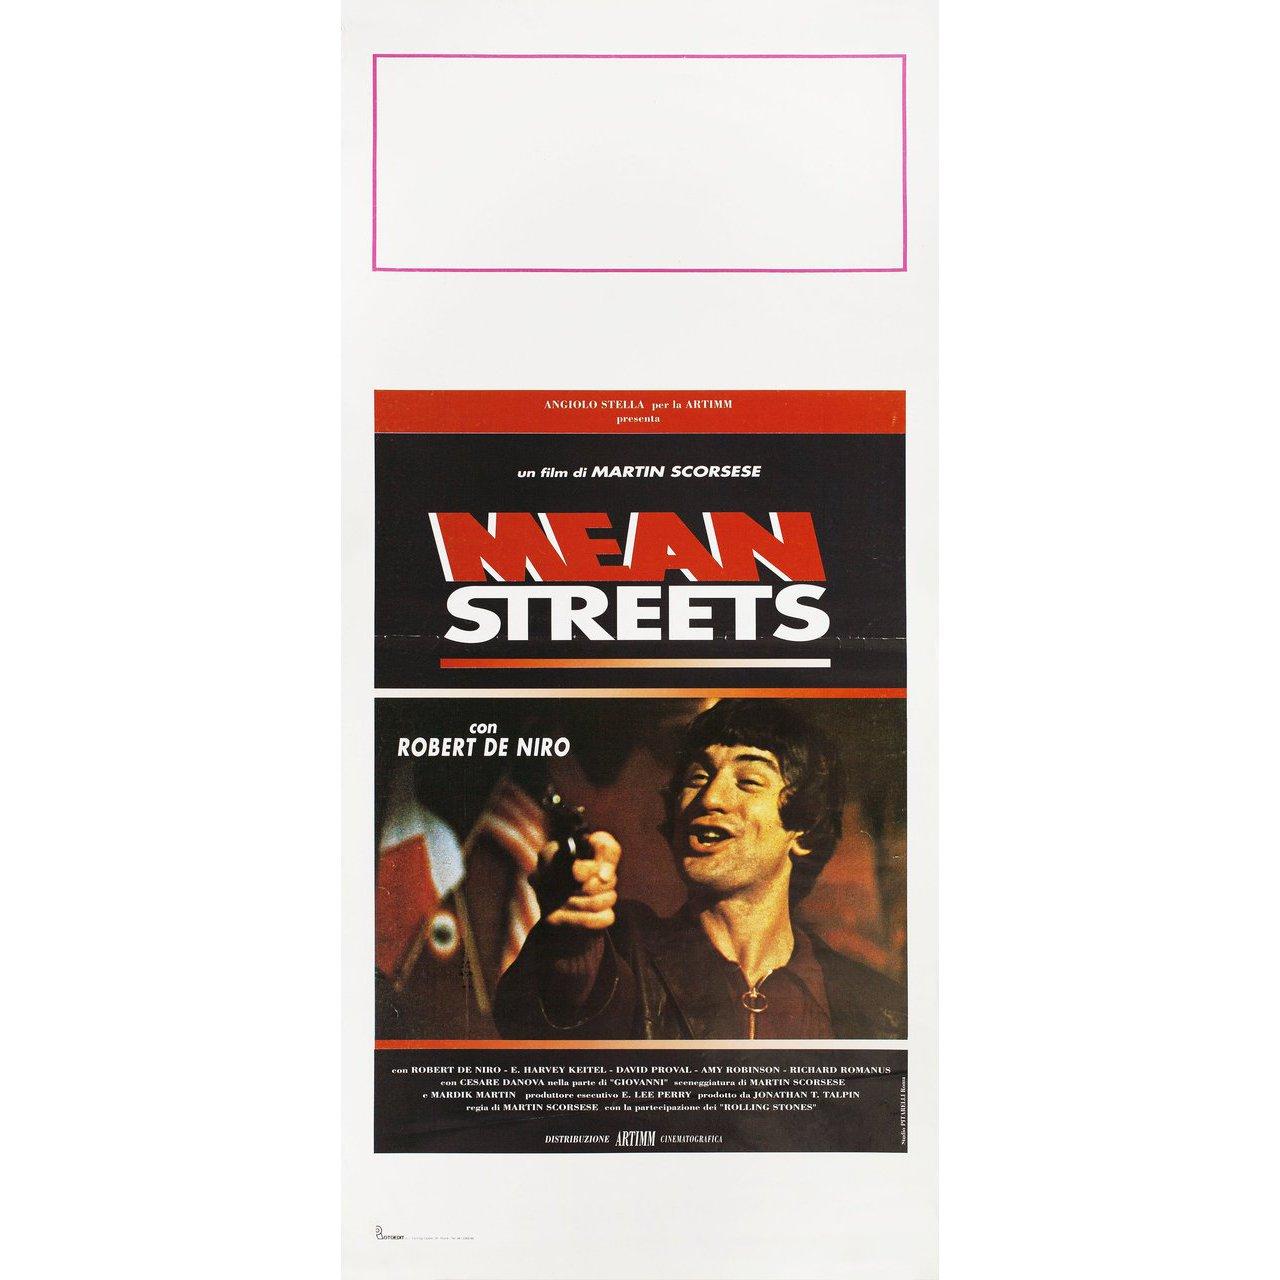 Original 1980s re-release Italian locandina poster for the 1973 film 'Mean Streets' directed by Martin Scorsese with Robert De Niro / Harvey Keitel / David Proval / Amy Robinson. Very good-fine condition, folded. Many original posters were issued